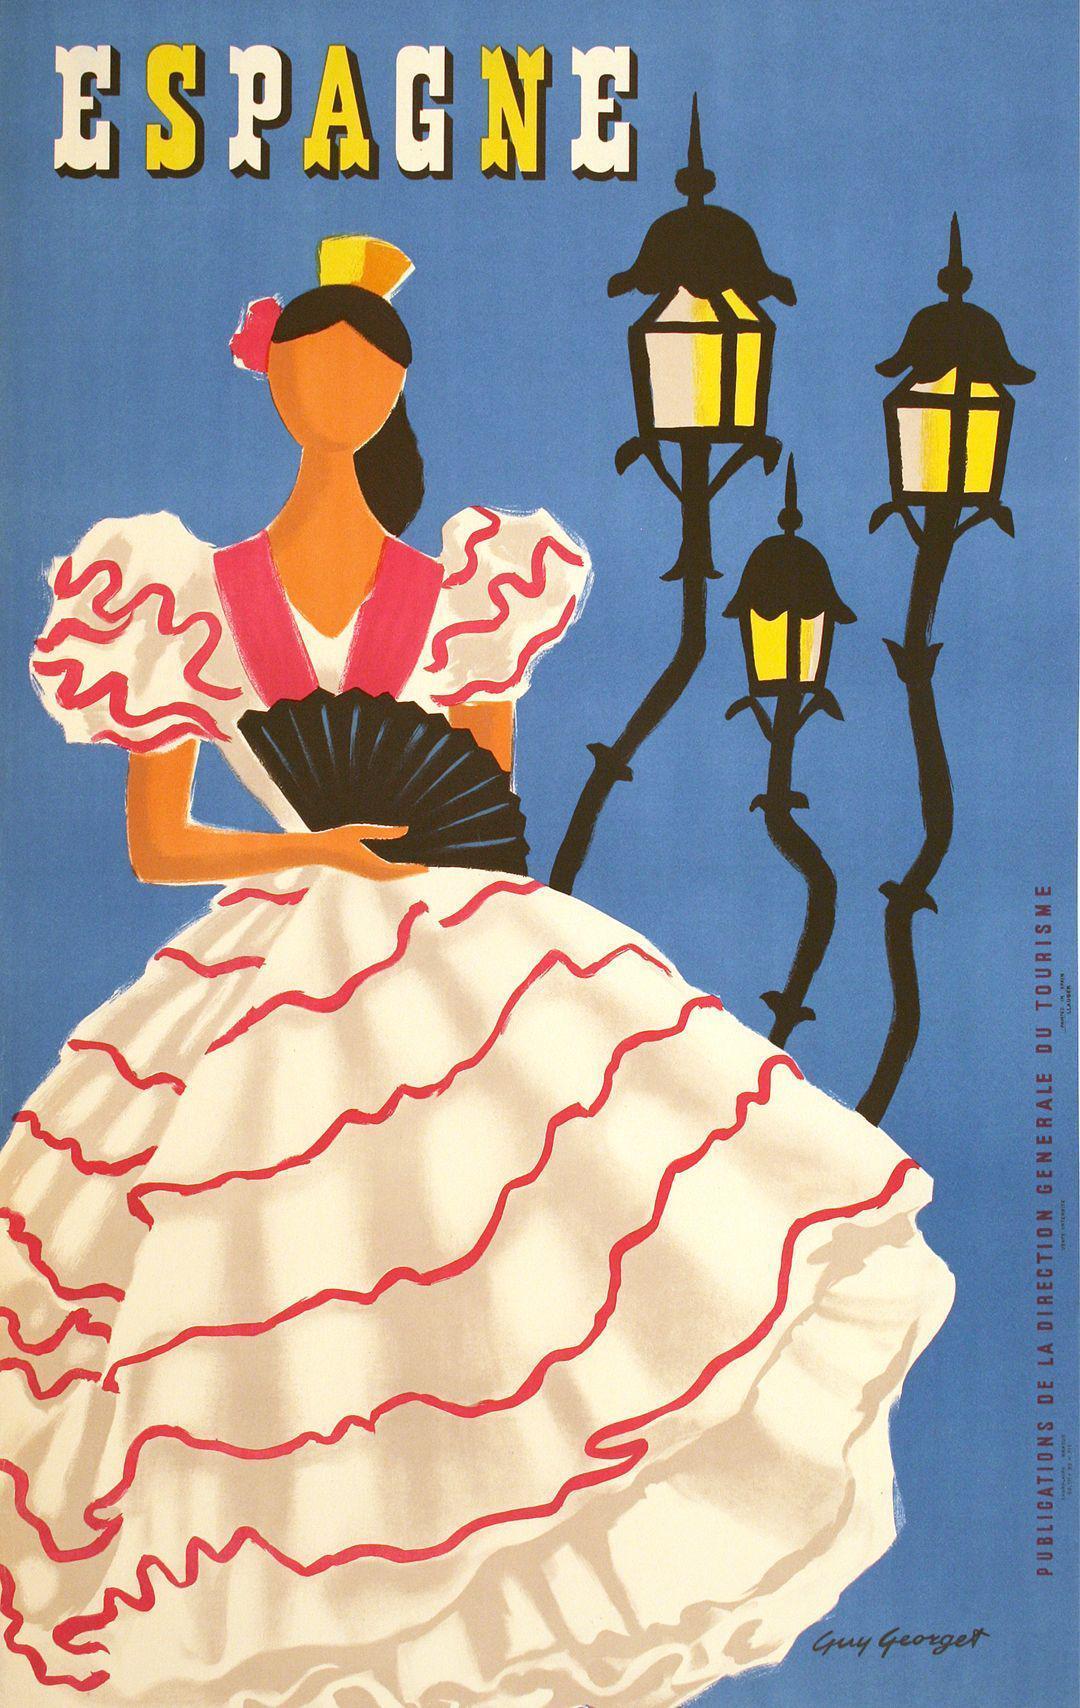 Espagne Original 1950's Travel Poster by Guy Georget Woman in White Dress